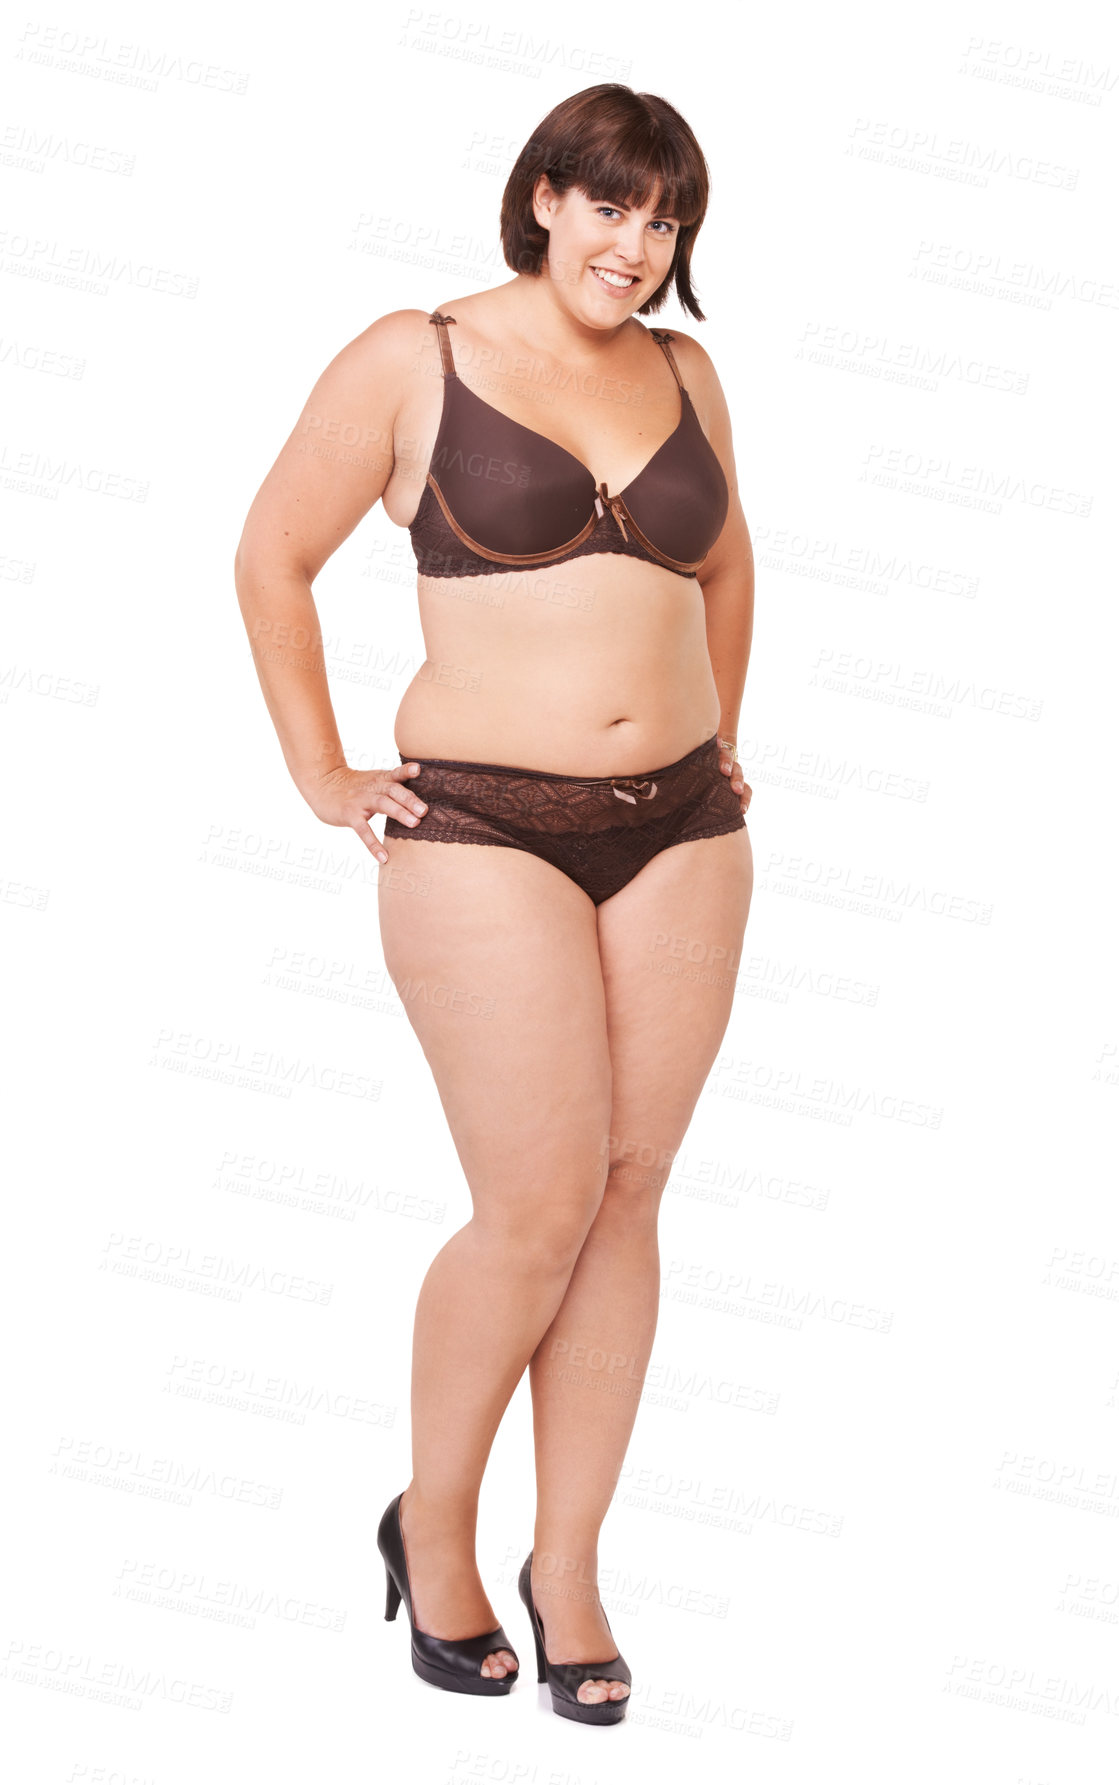 Buy stock photo Full length portrait of a voluptuous woman in lingerie on a white background